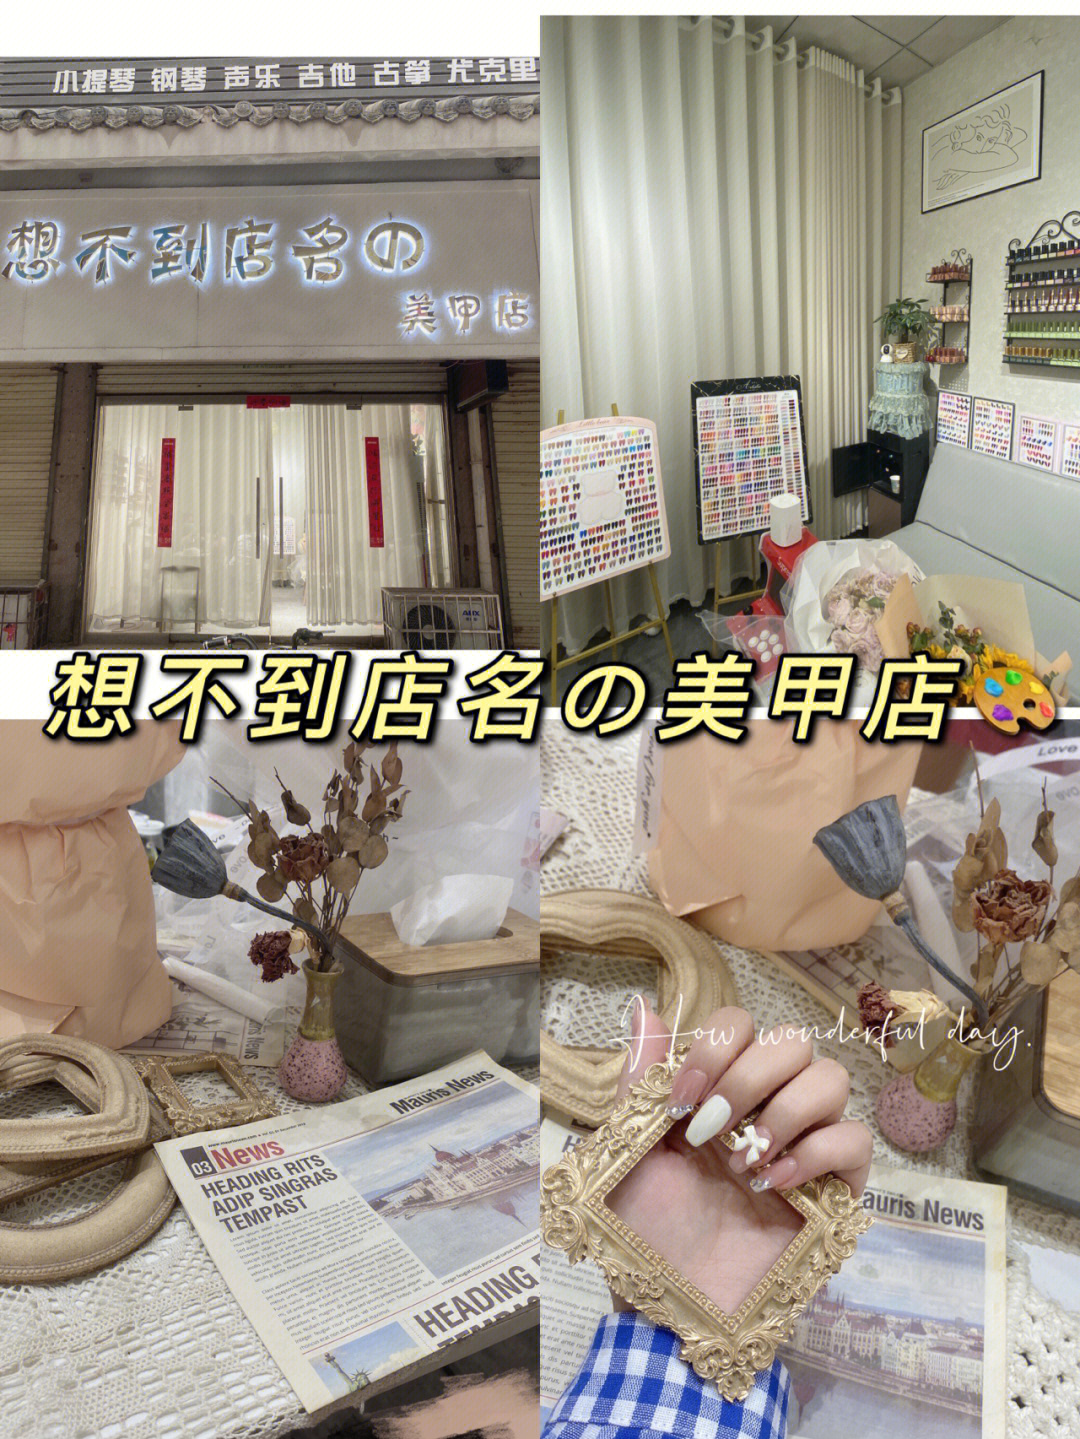 The largest nail salon in Japan_The hottest nail salon in Japan_The top nail salon in Japan